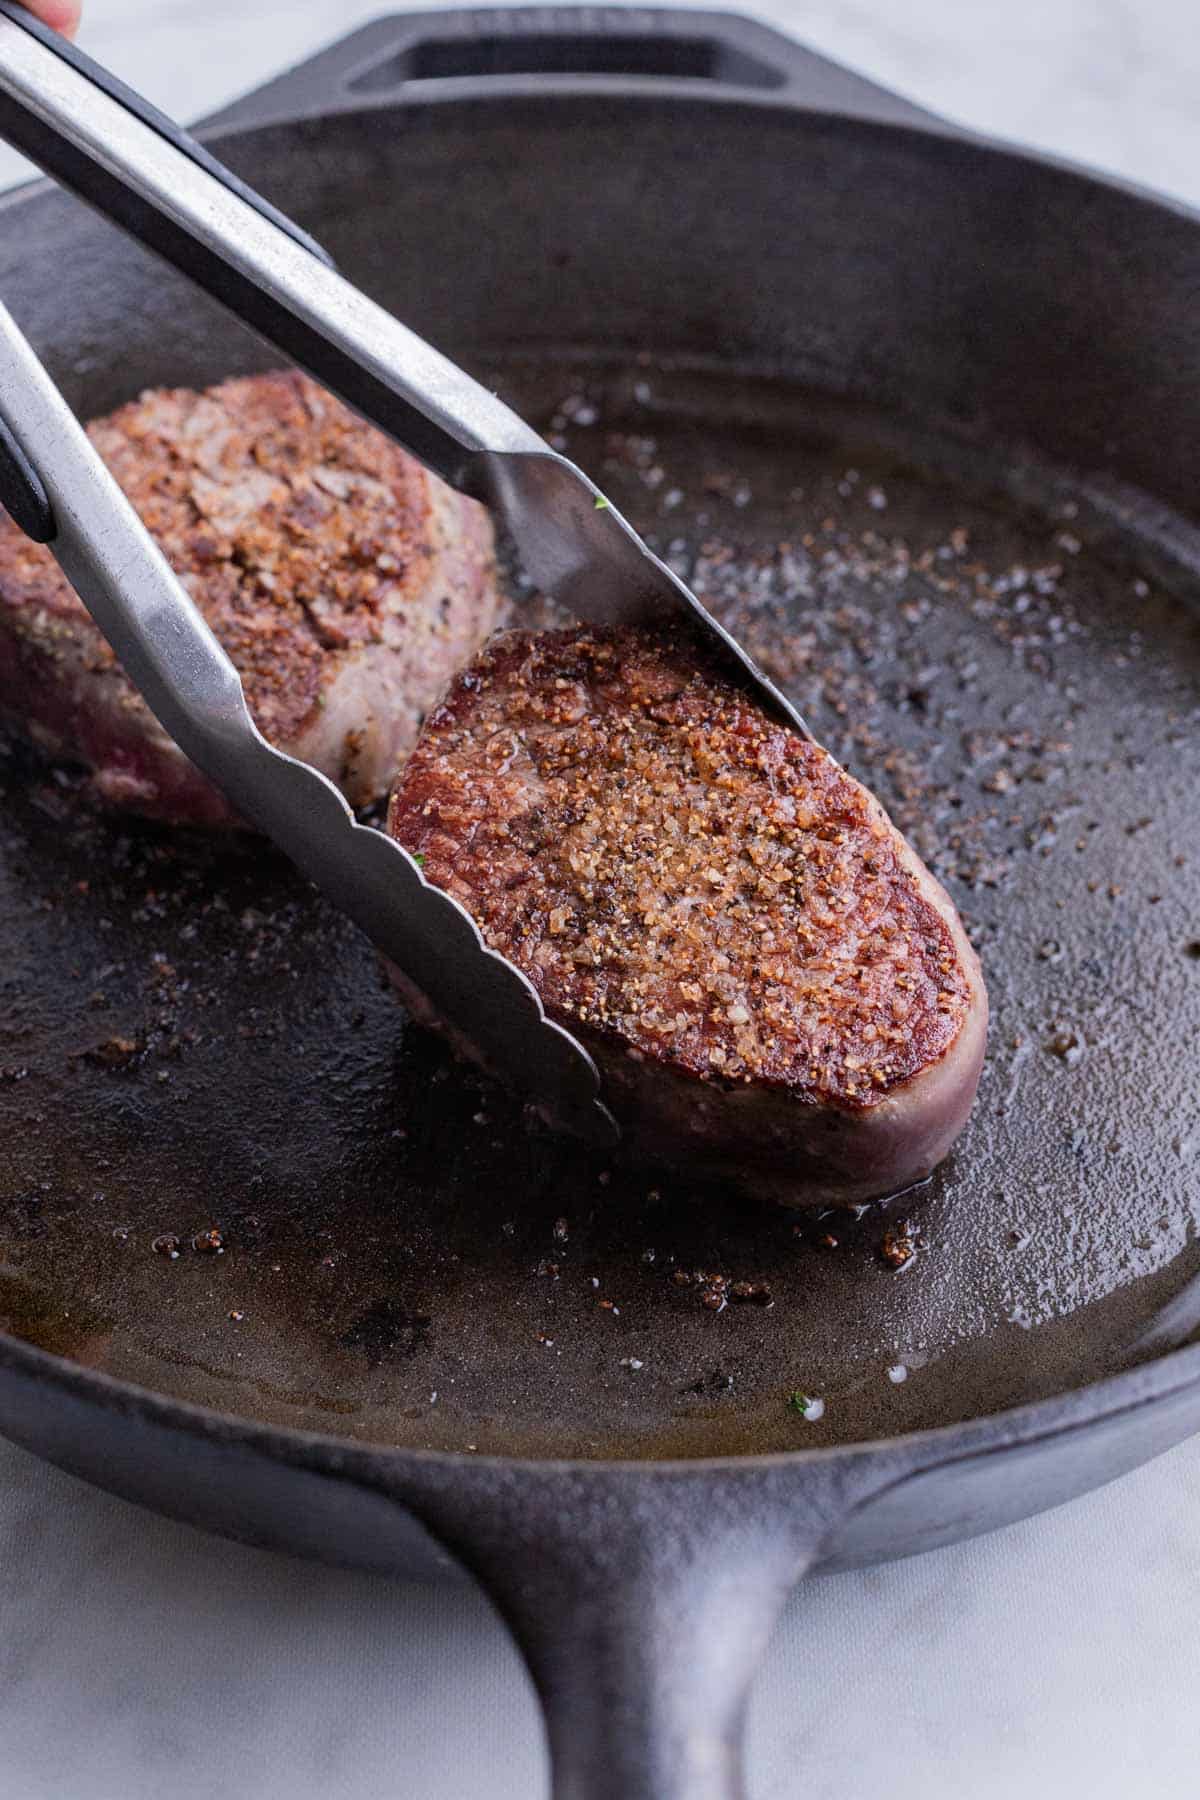 A pair of tongs flips a filet mignon in a cast-iron skillet.